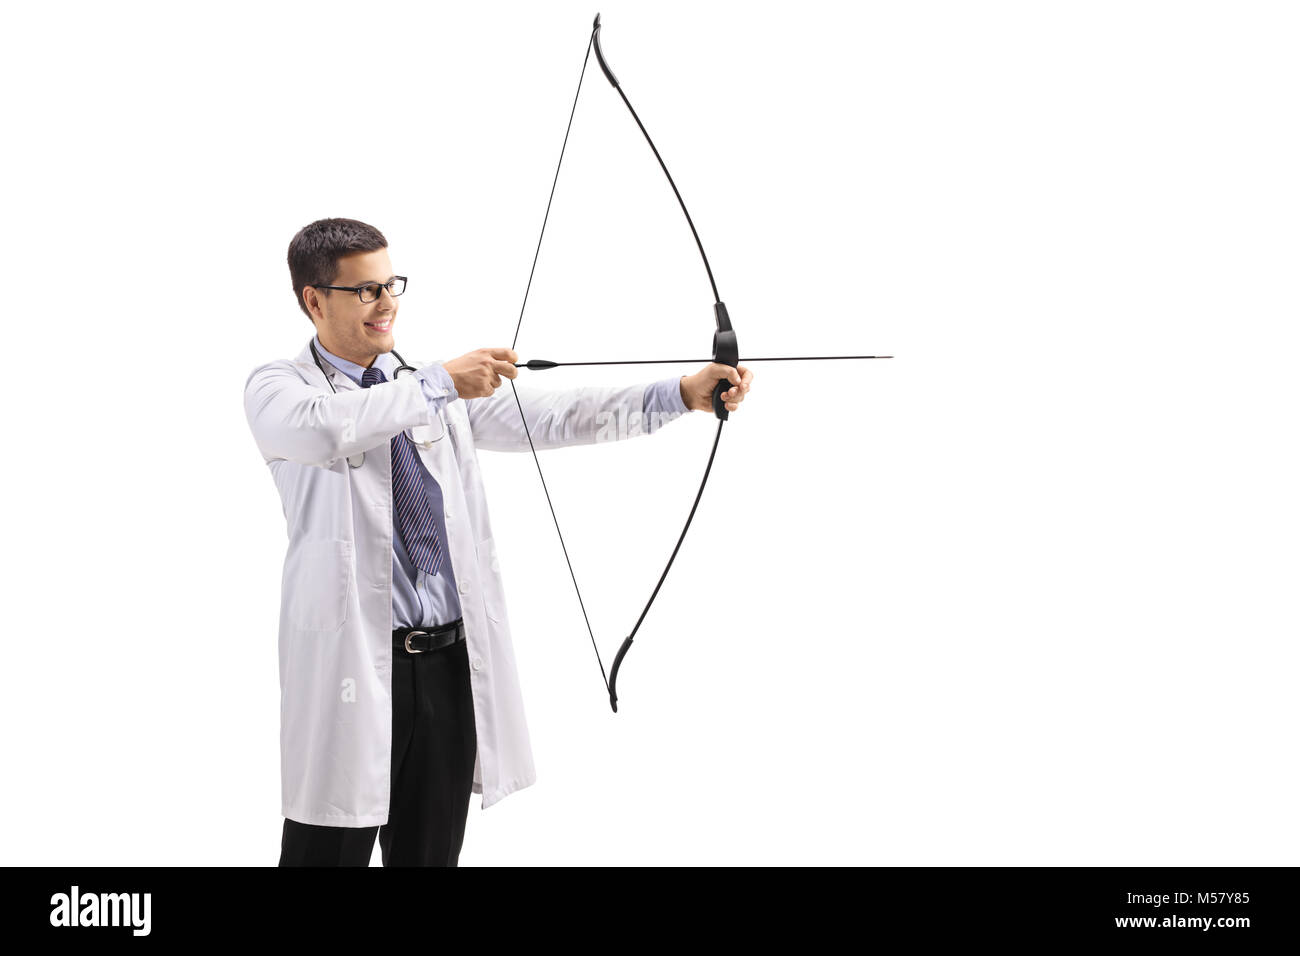 Doctor aiming with a bow and arrow isolated on white background Stock Photo